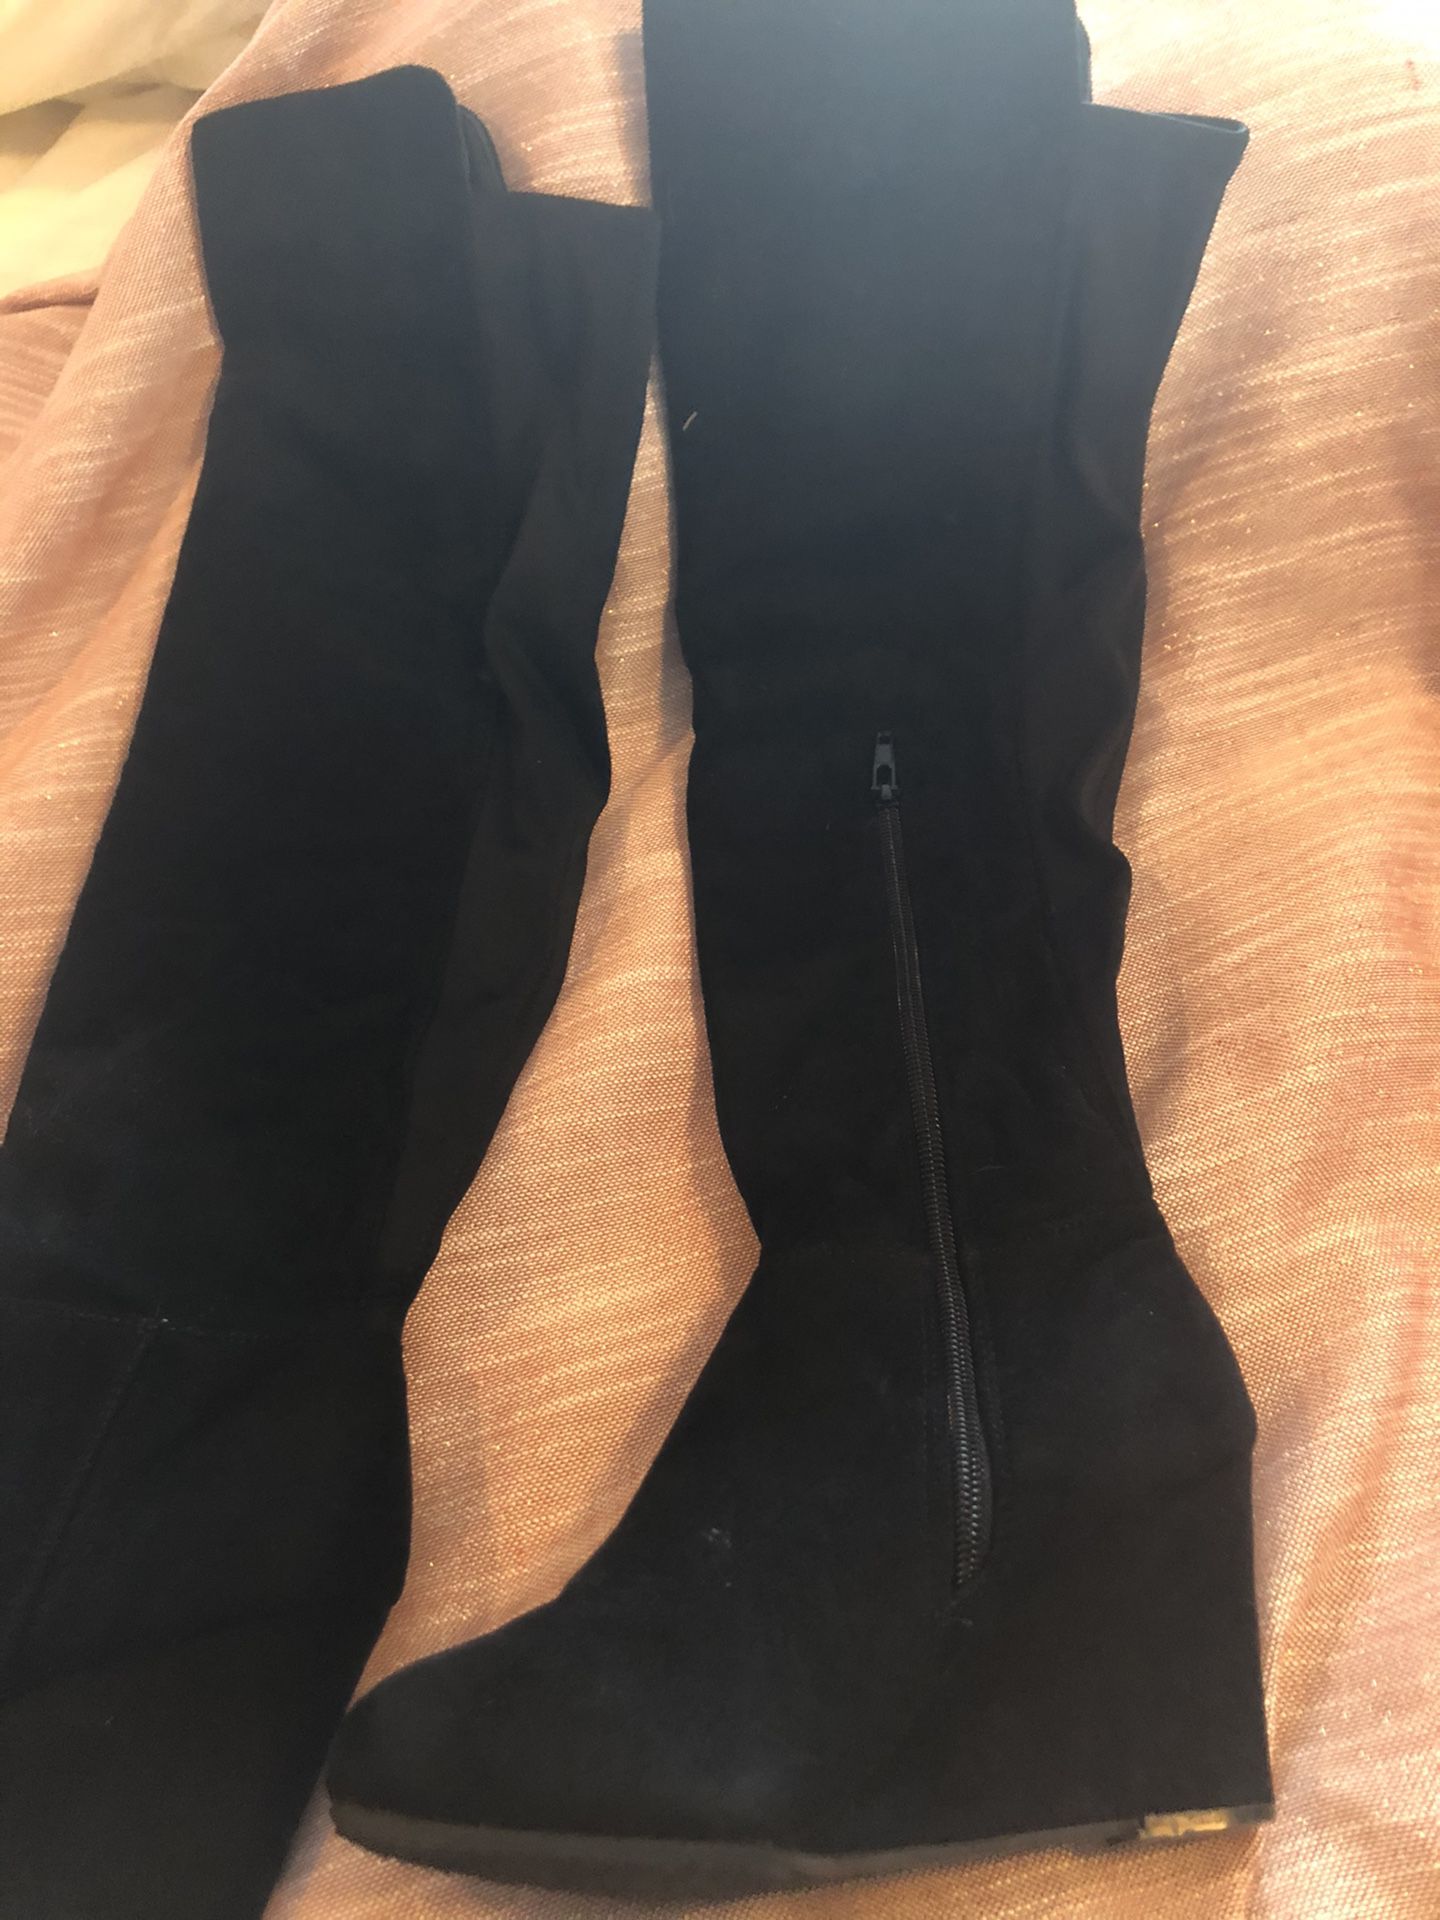 Size 6 knee high wedge boots